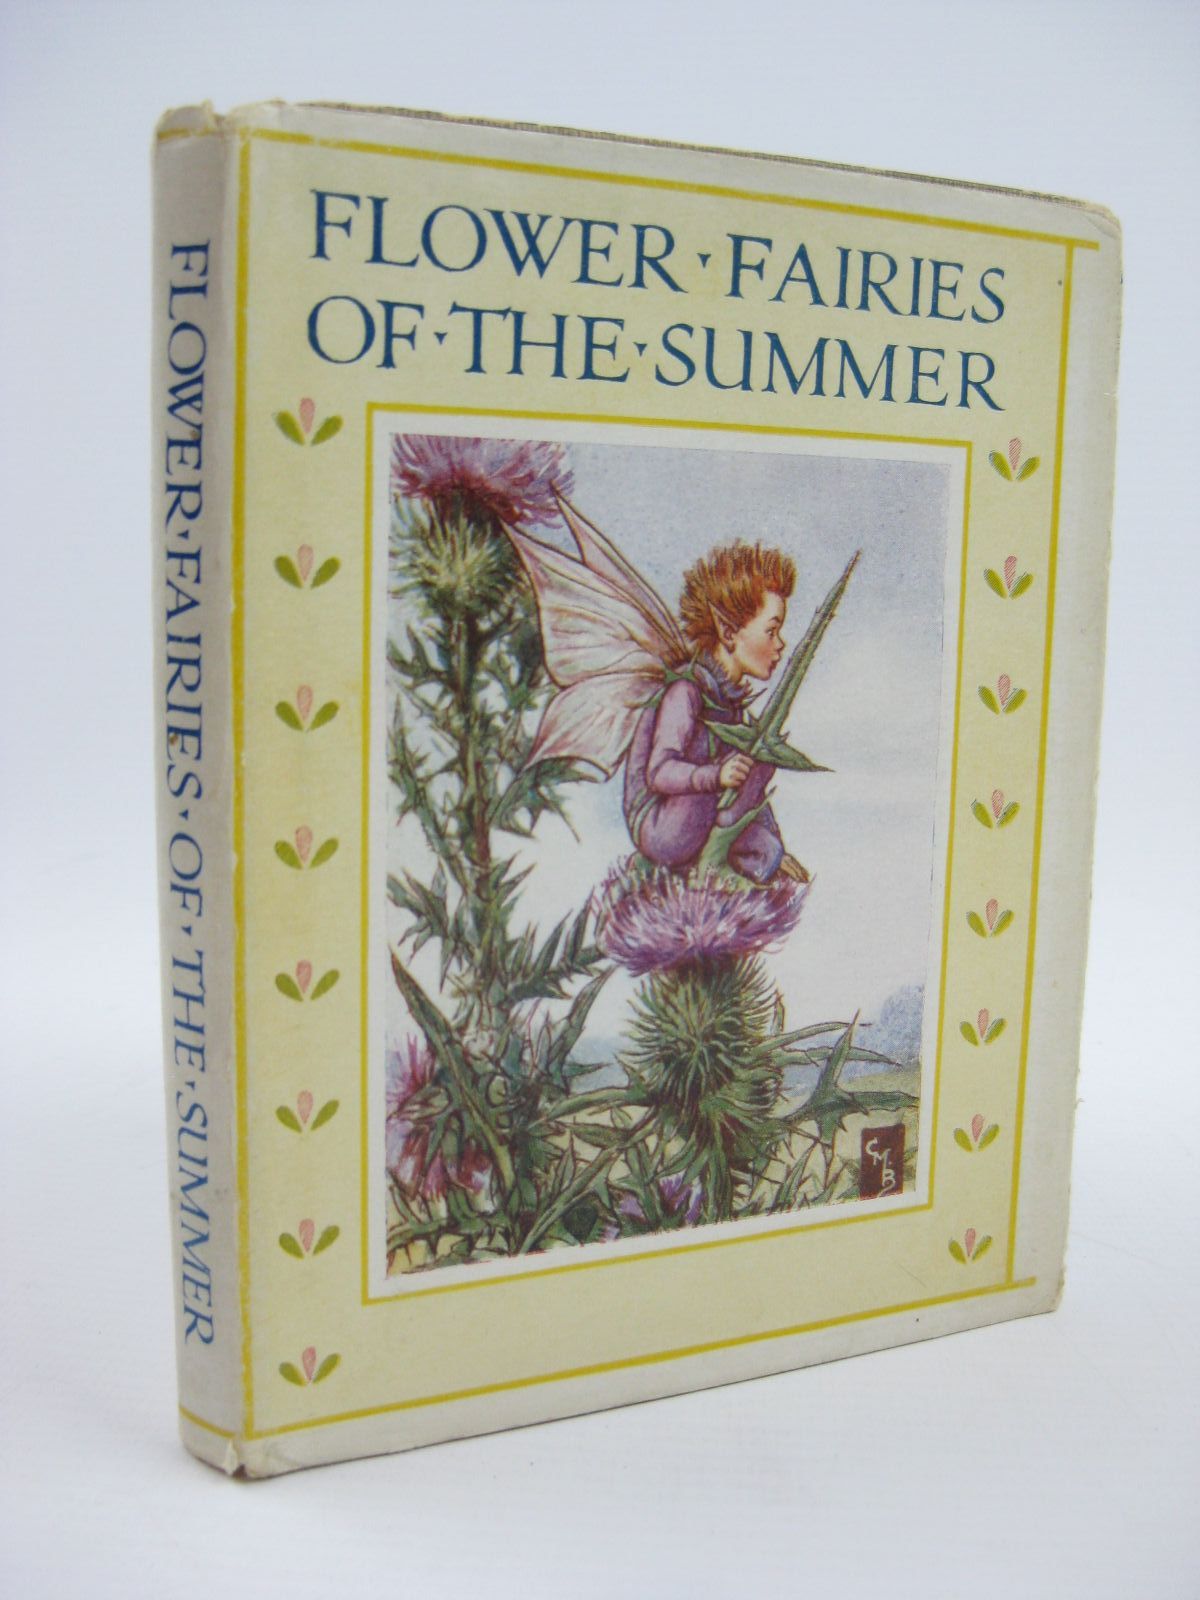 flower fairies by cicely mary barker | featured books : stella